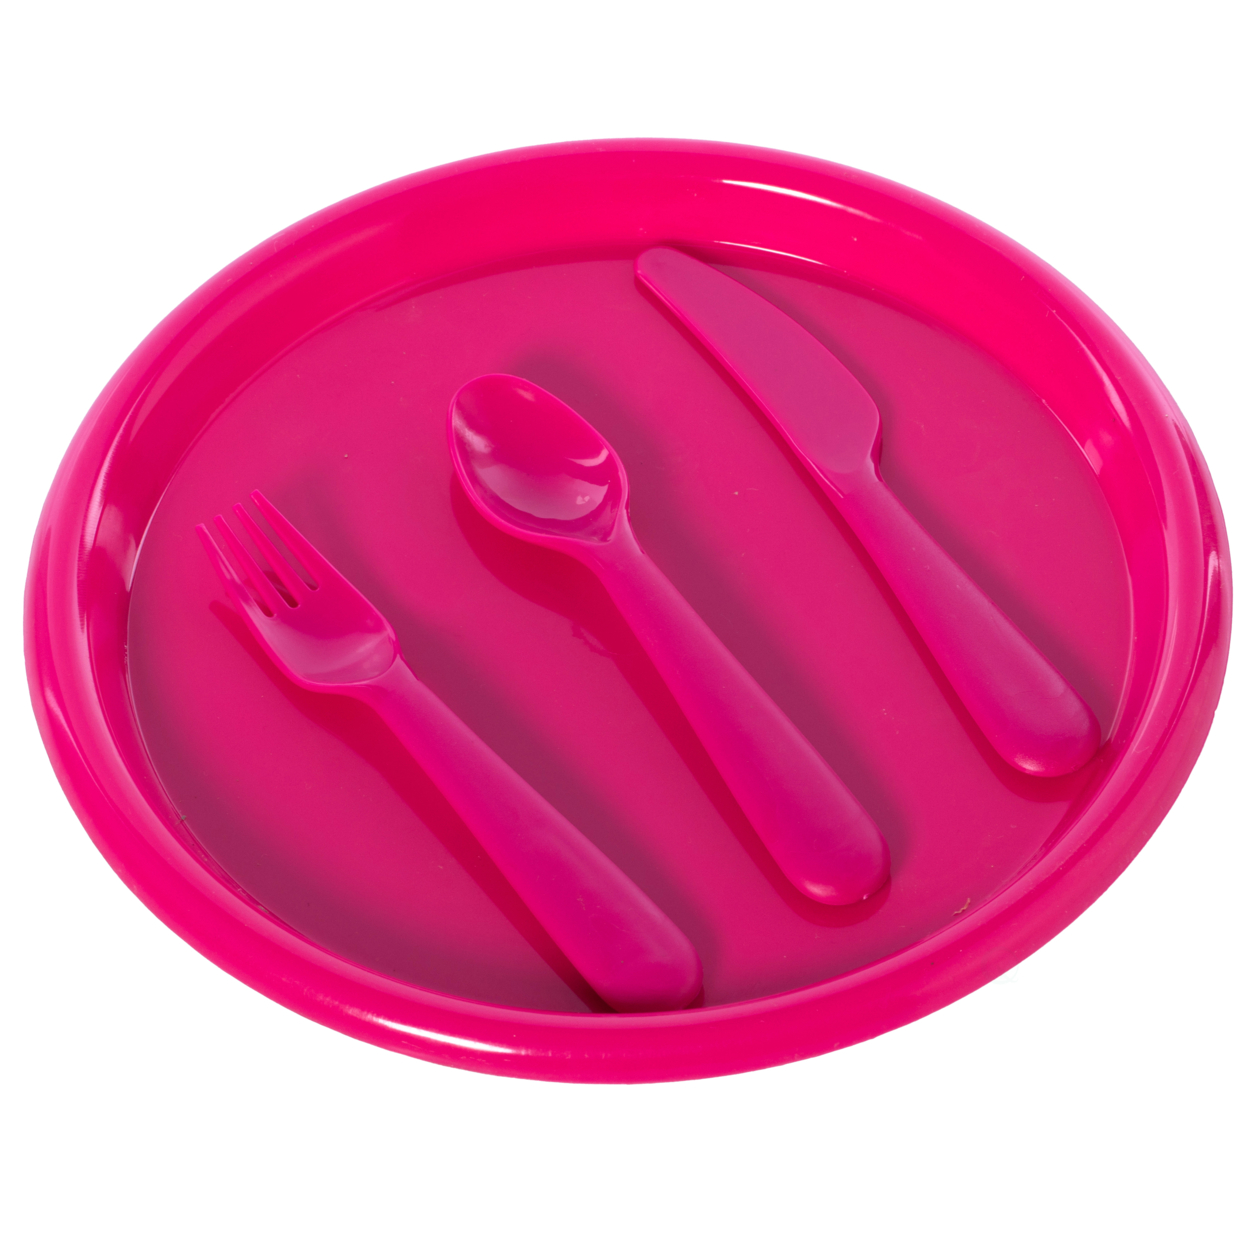 Reusable Cutlery Set Of 4 Plastic Plates, Spoons, Forks And Knives For Baby And Toddlers - Pink